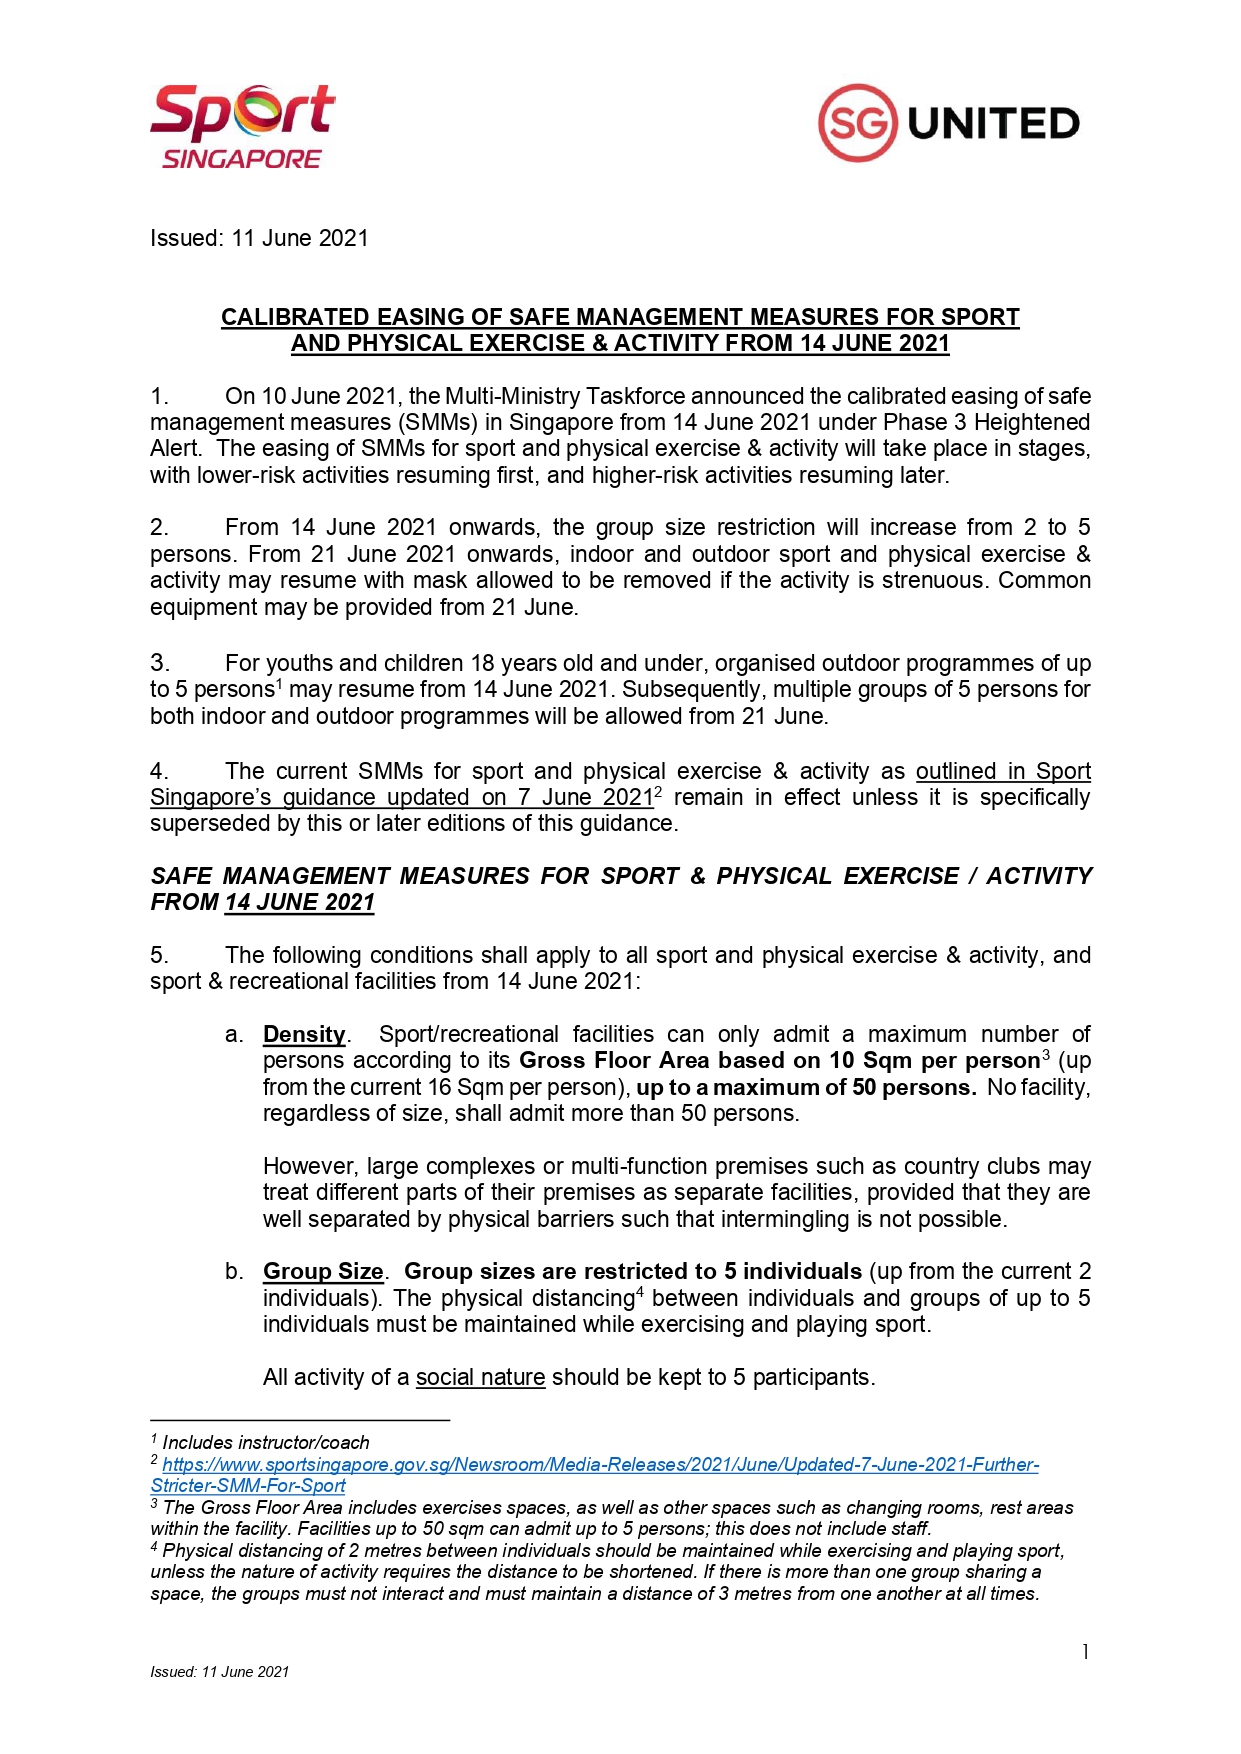 Calibrated Easing of SMM for Sport_PE_PA (11 Jun 21)_page-0001